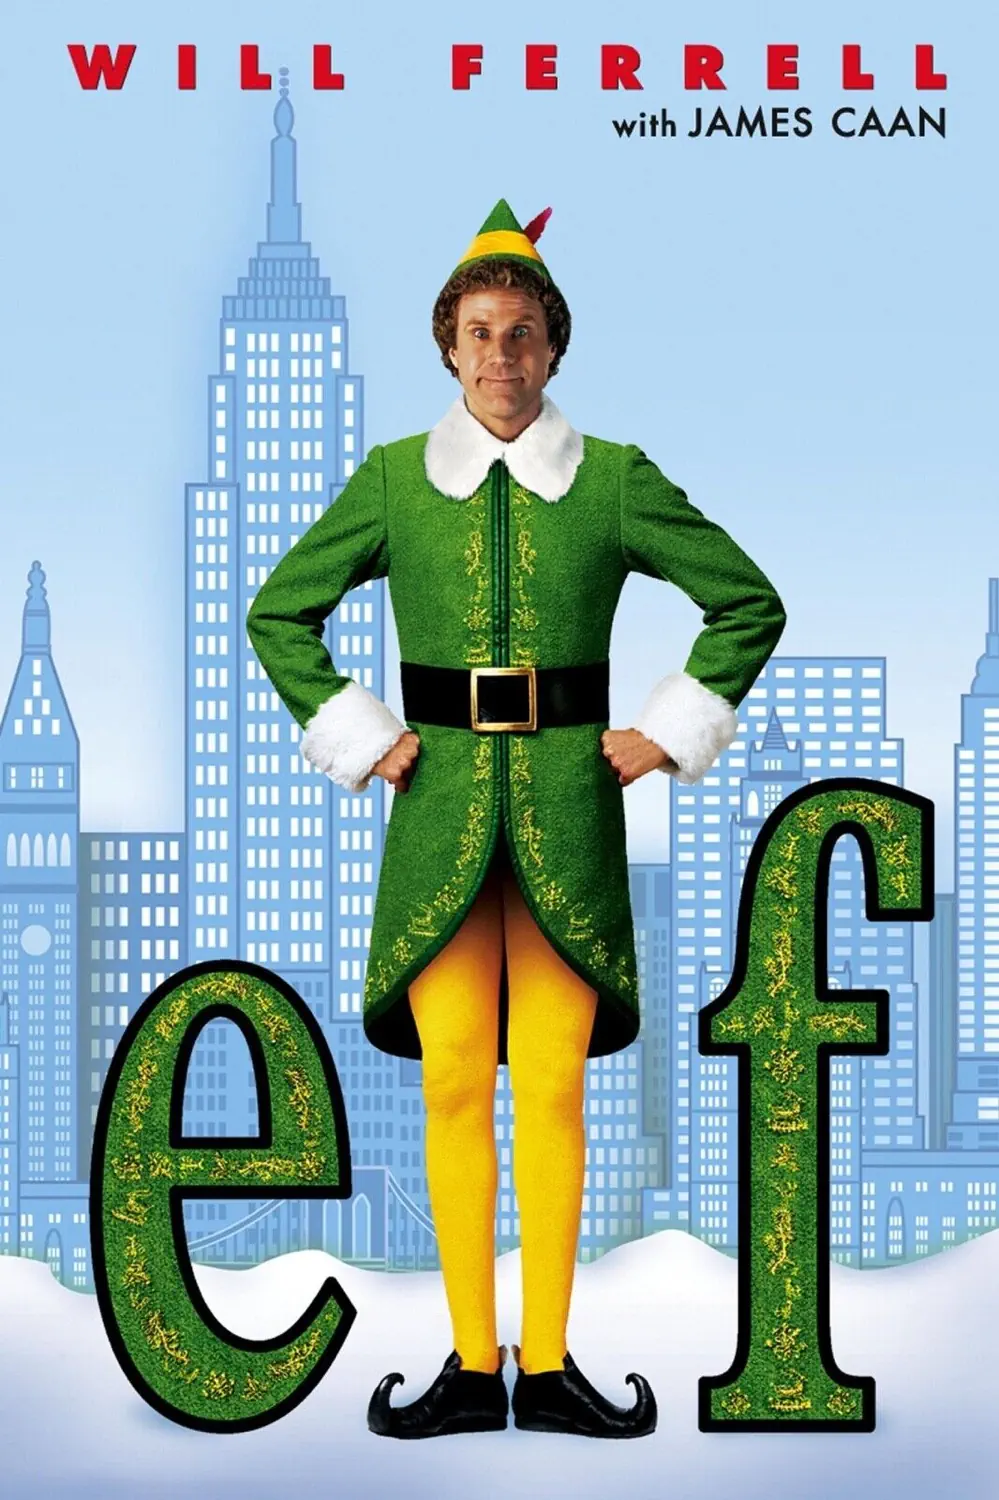 Poster for Will Ferrel's classic movie, Elf. (source: eBay Listing)